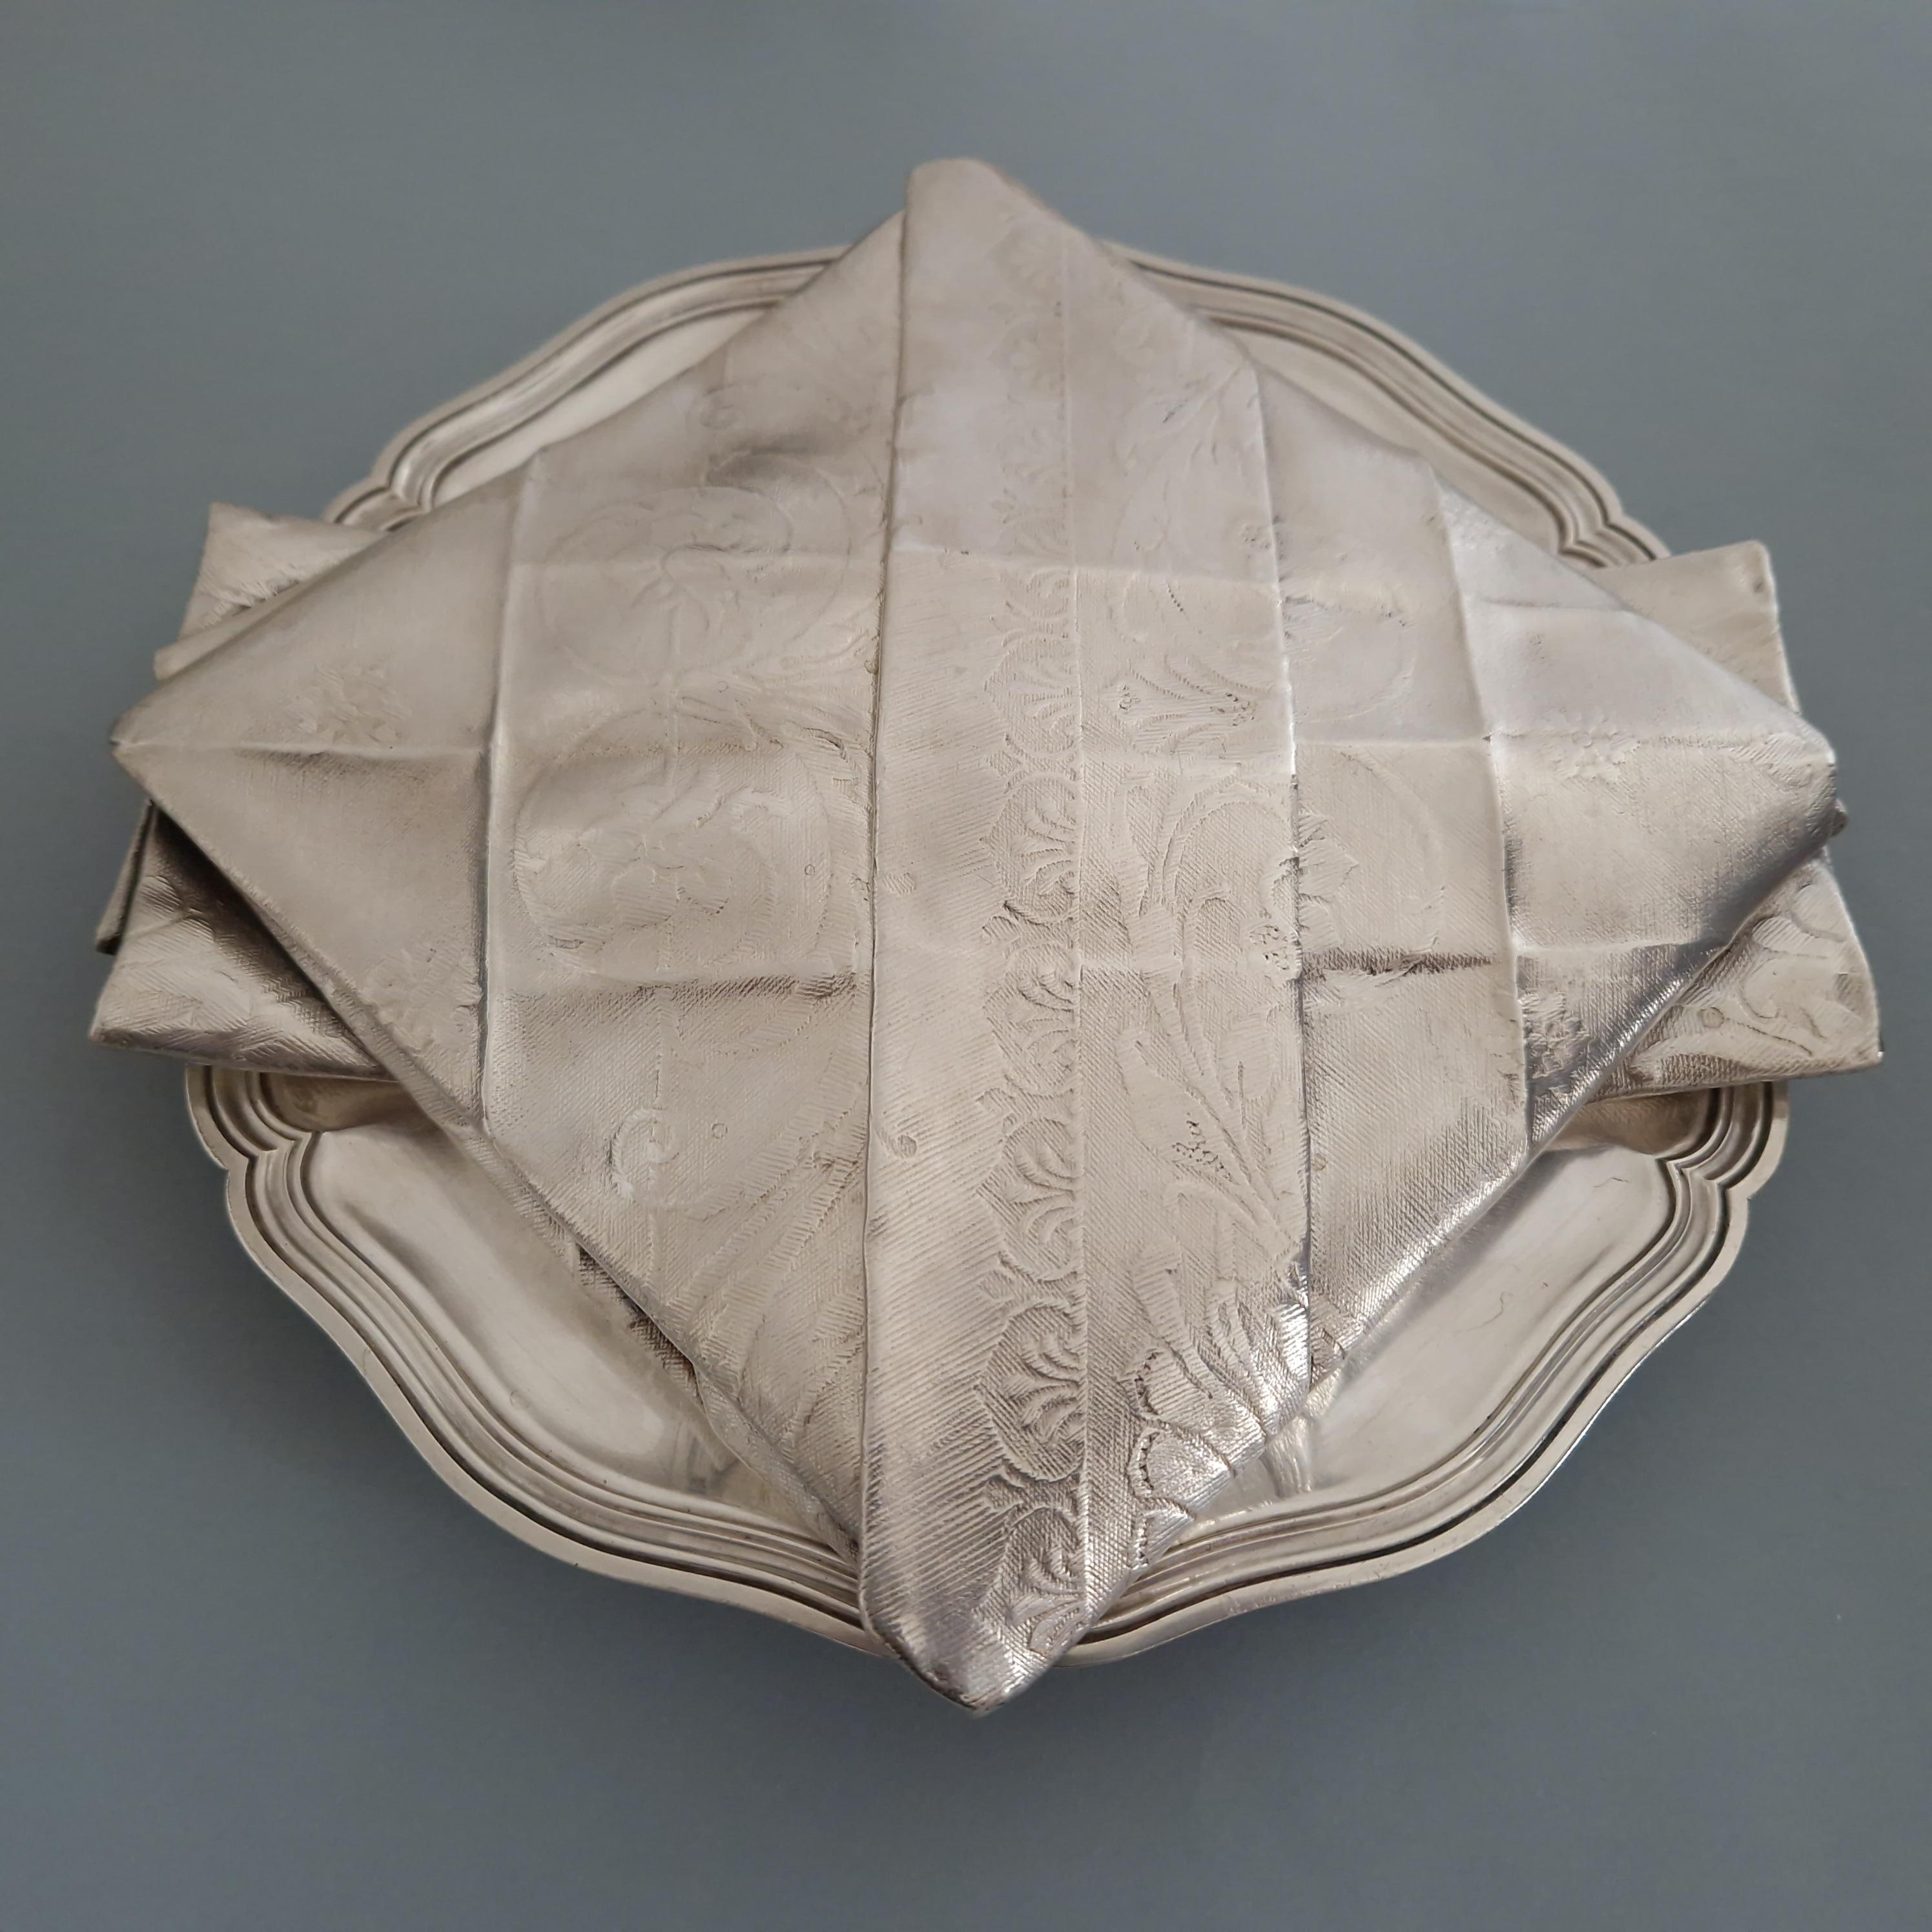 Rare silver-plated chestnut plate from Maison Christofle 

Two damask and folded napkins forming a lid opening in the middle, rest on a silver-plated plate molded with contoured fillets 

Christofle hallmark 
Number 1014342, circa 1880 
28 x